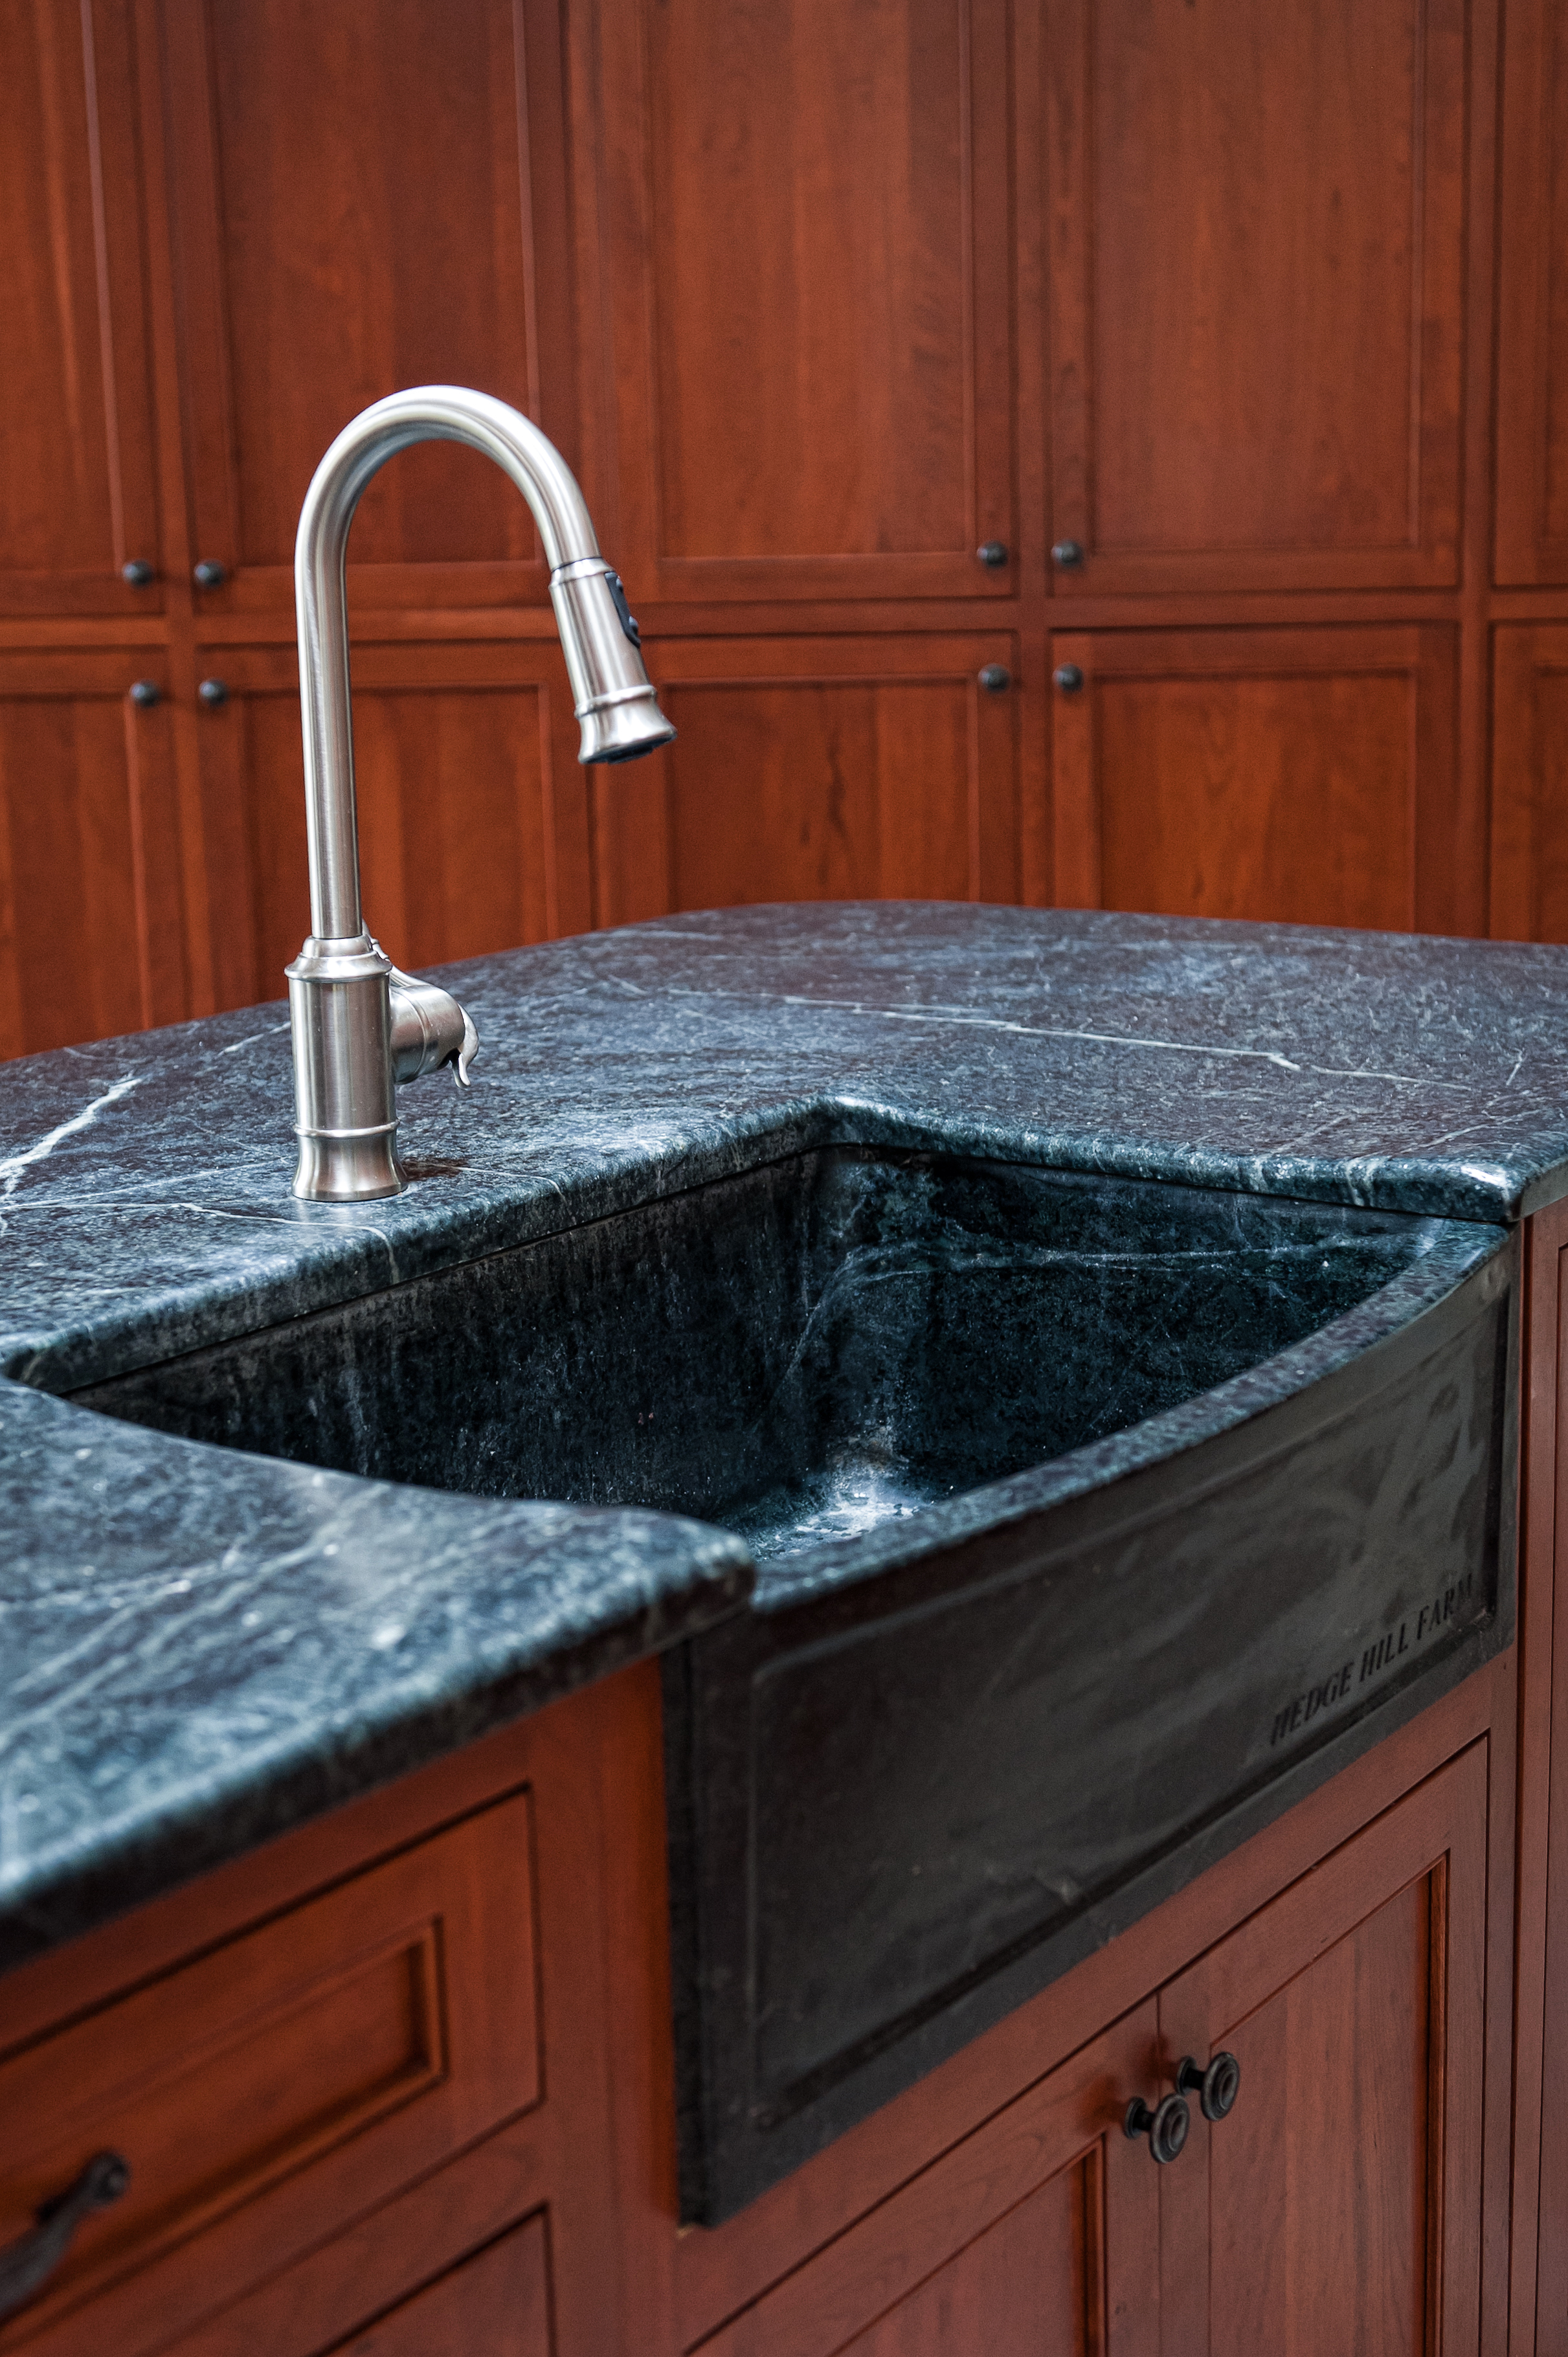 Soapstone countertop and sink